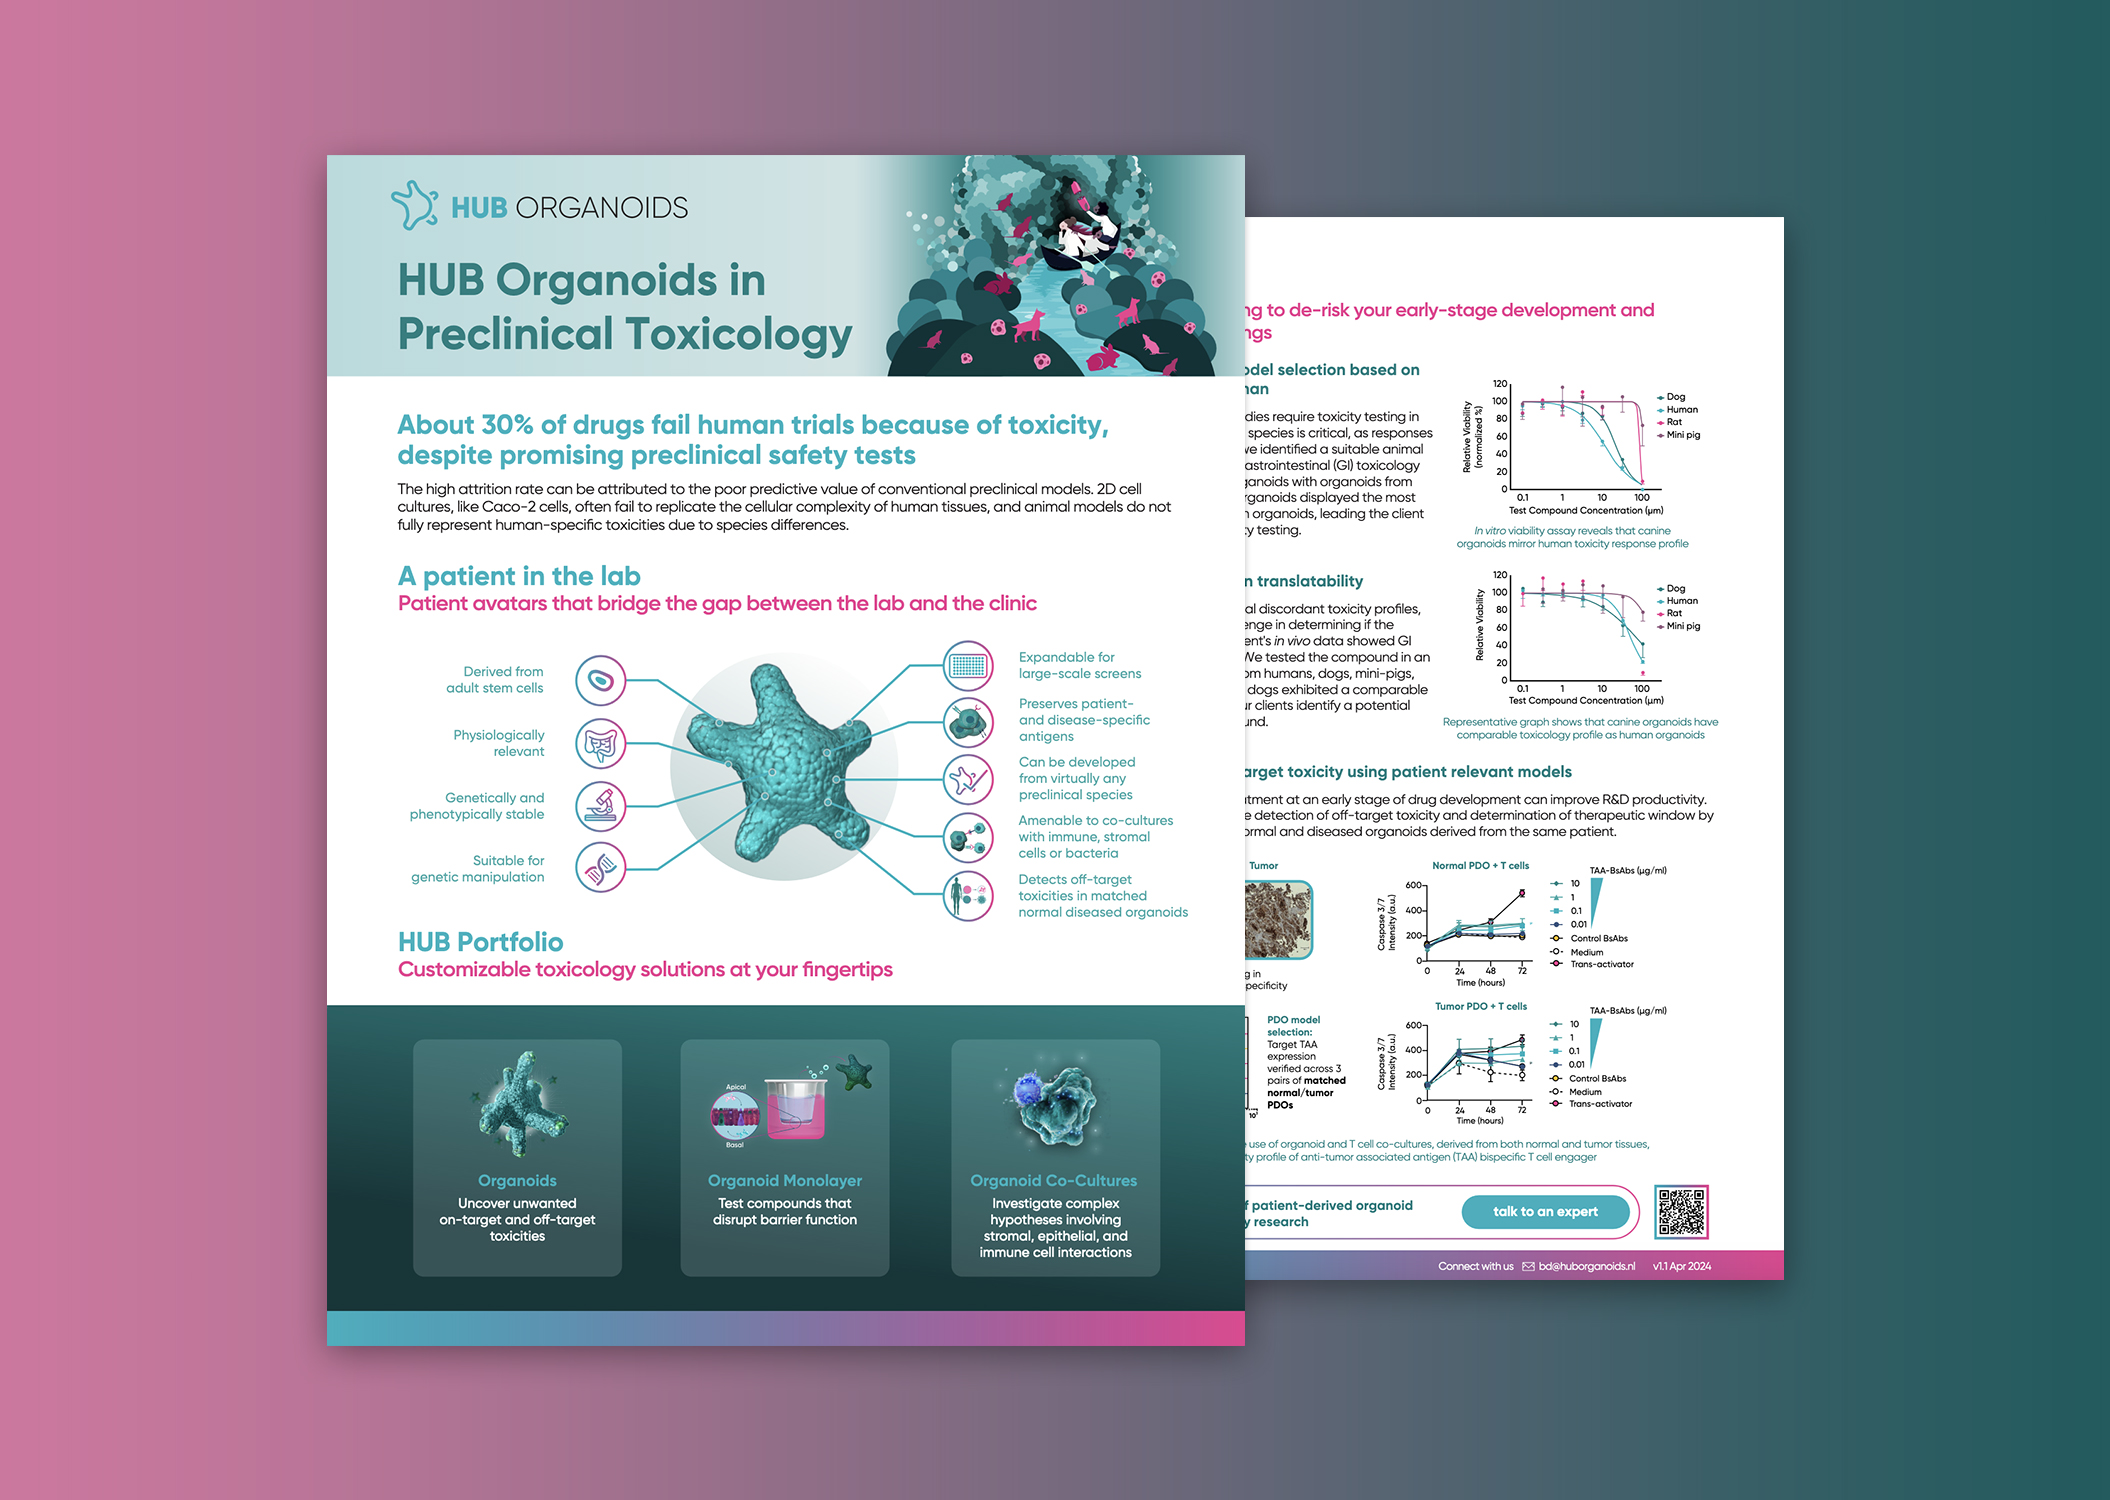 HUB Organoids in Preclinical Toxicology